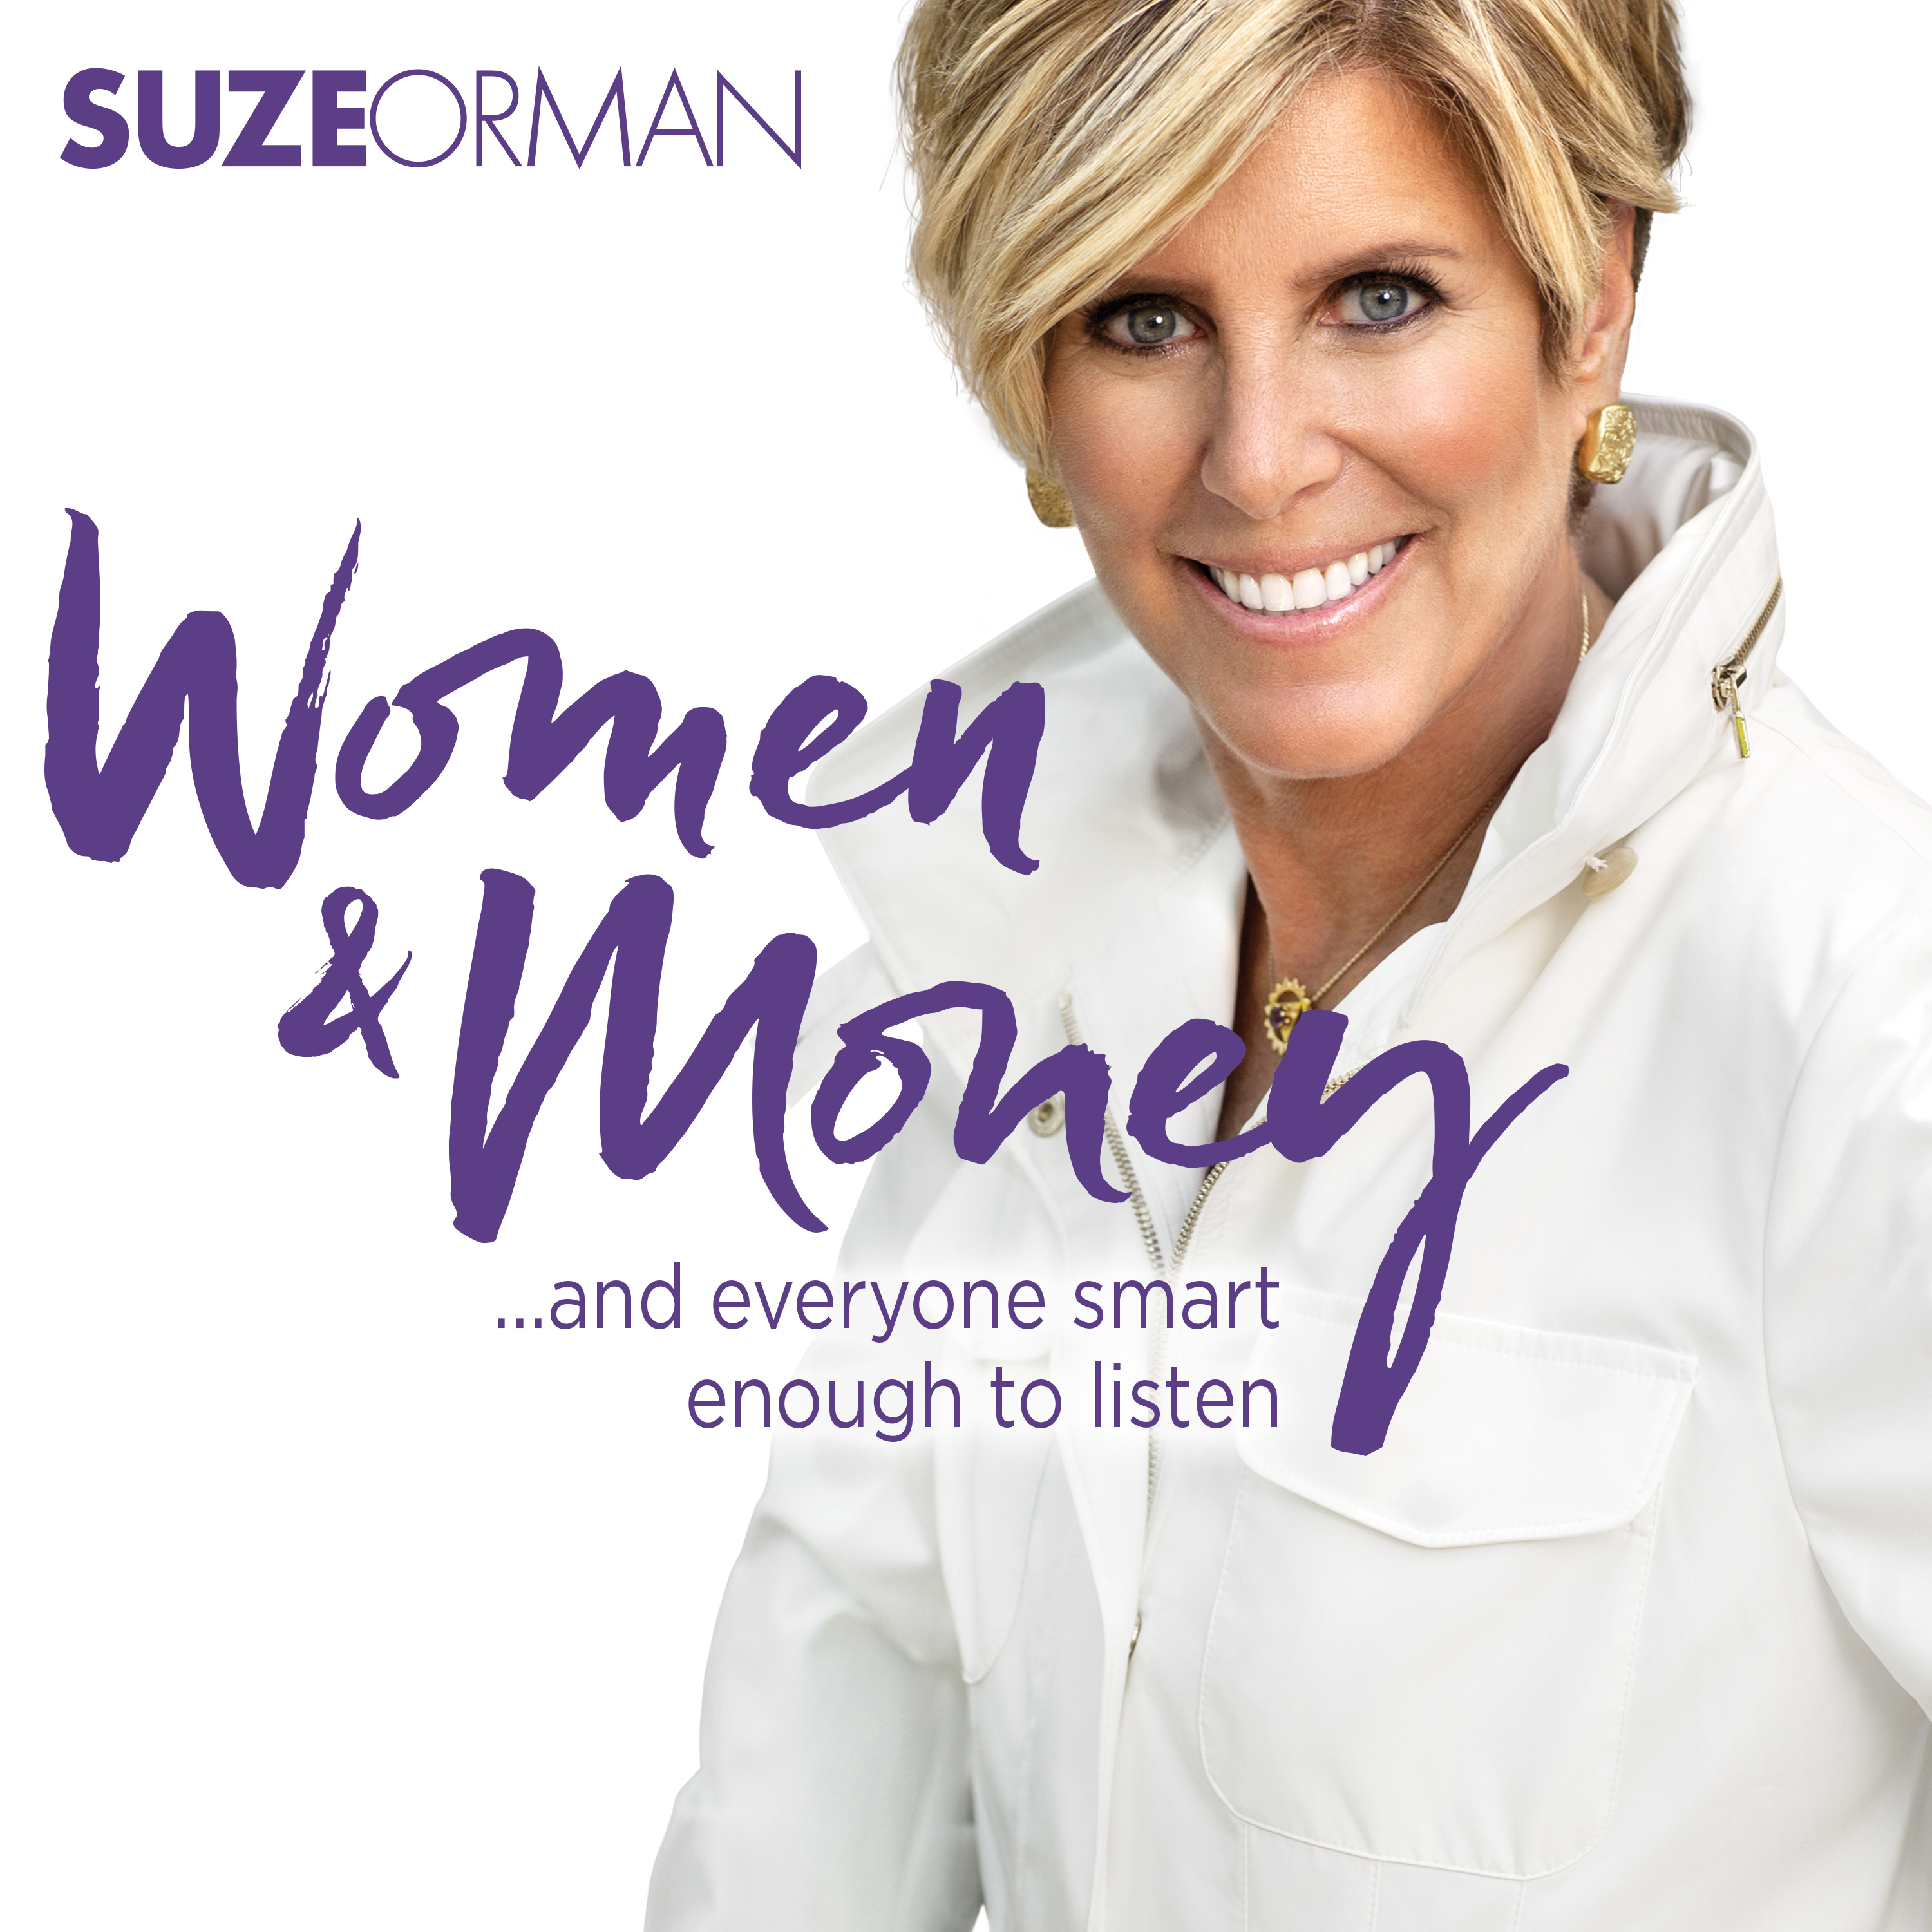 Suze School: Get Out A Pen and Paper and Learn How to Win $10,000